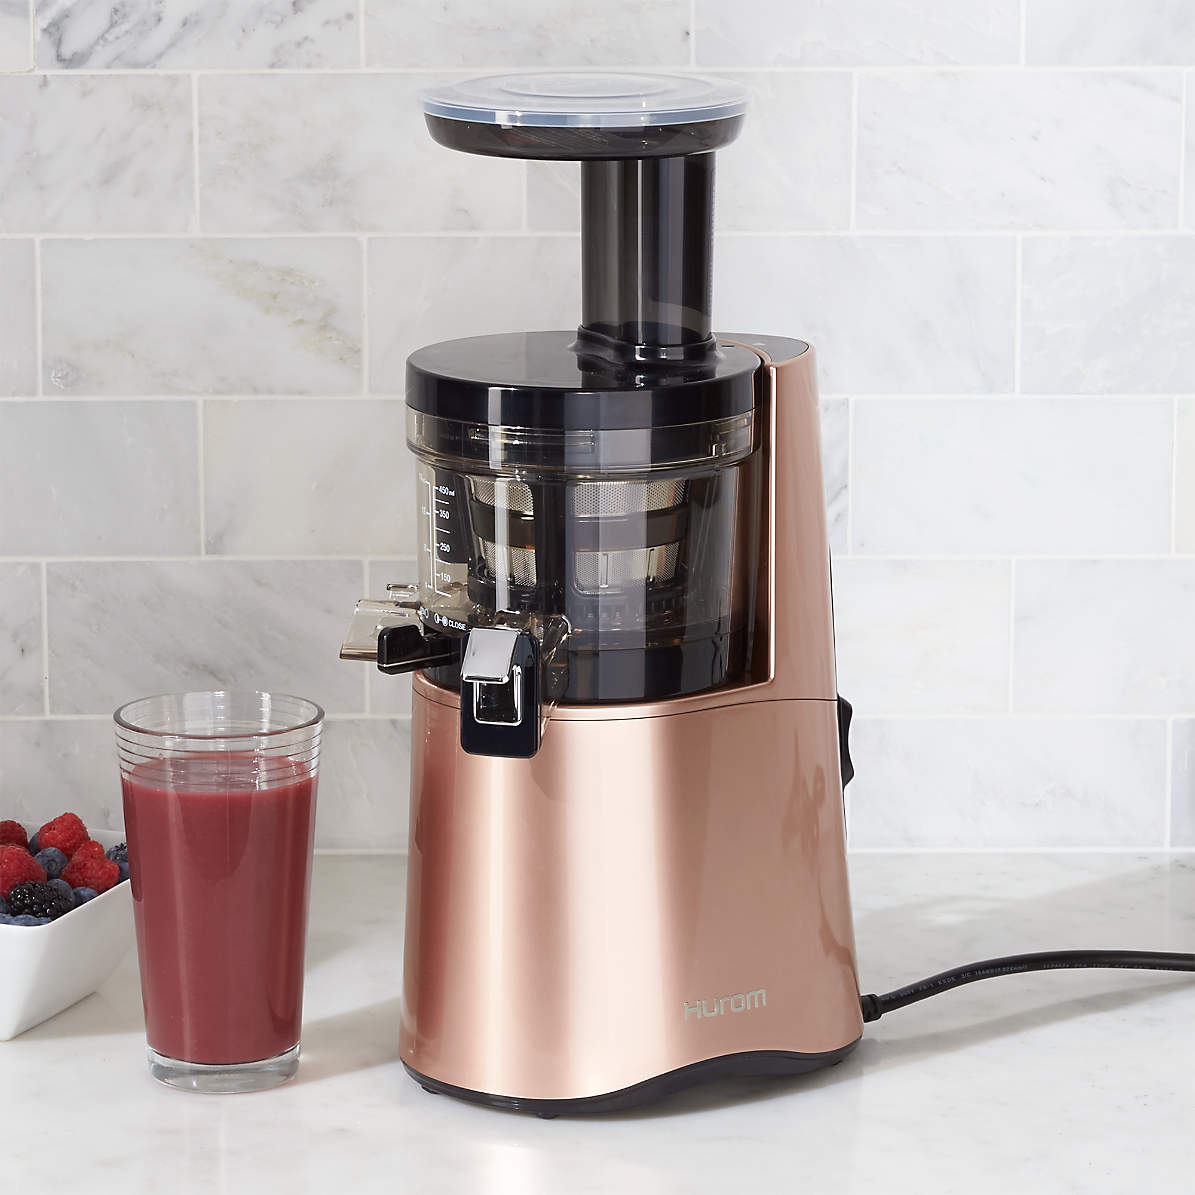 Hurom H-AA Rose Gold Slow Juicer + Reviews | Crate &